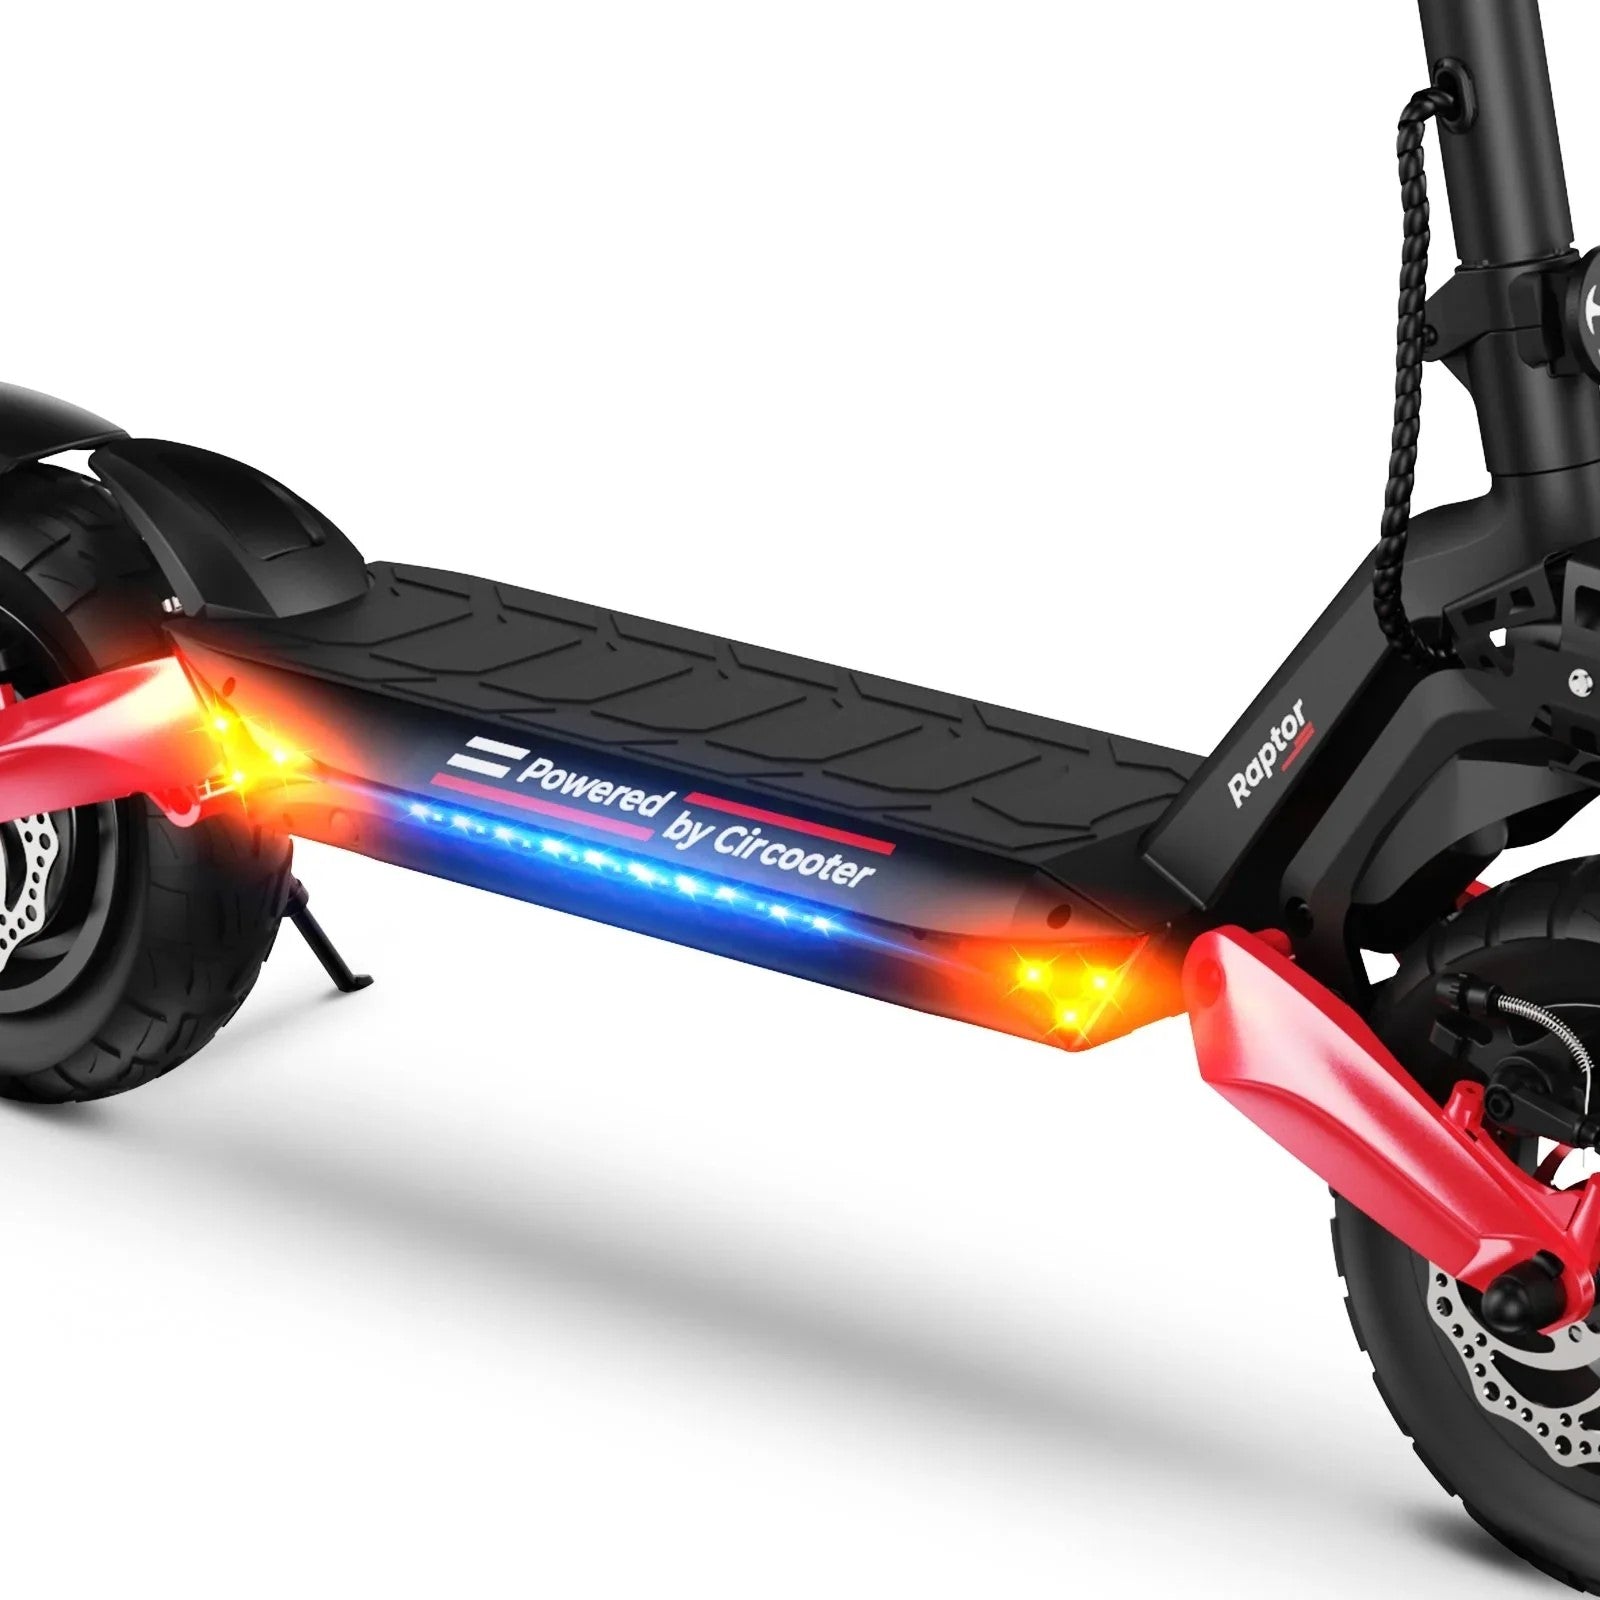 R3 Off Road Electric Scooter 800W Motor, 28 MPH